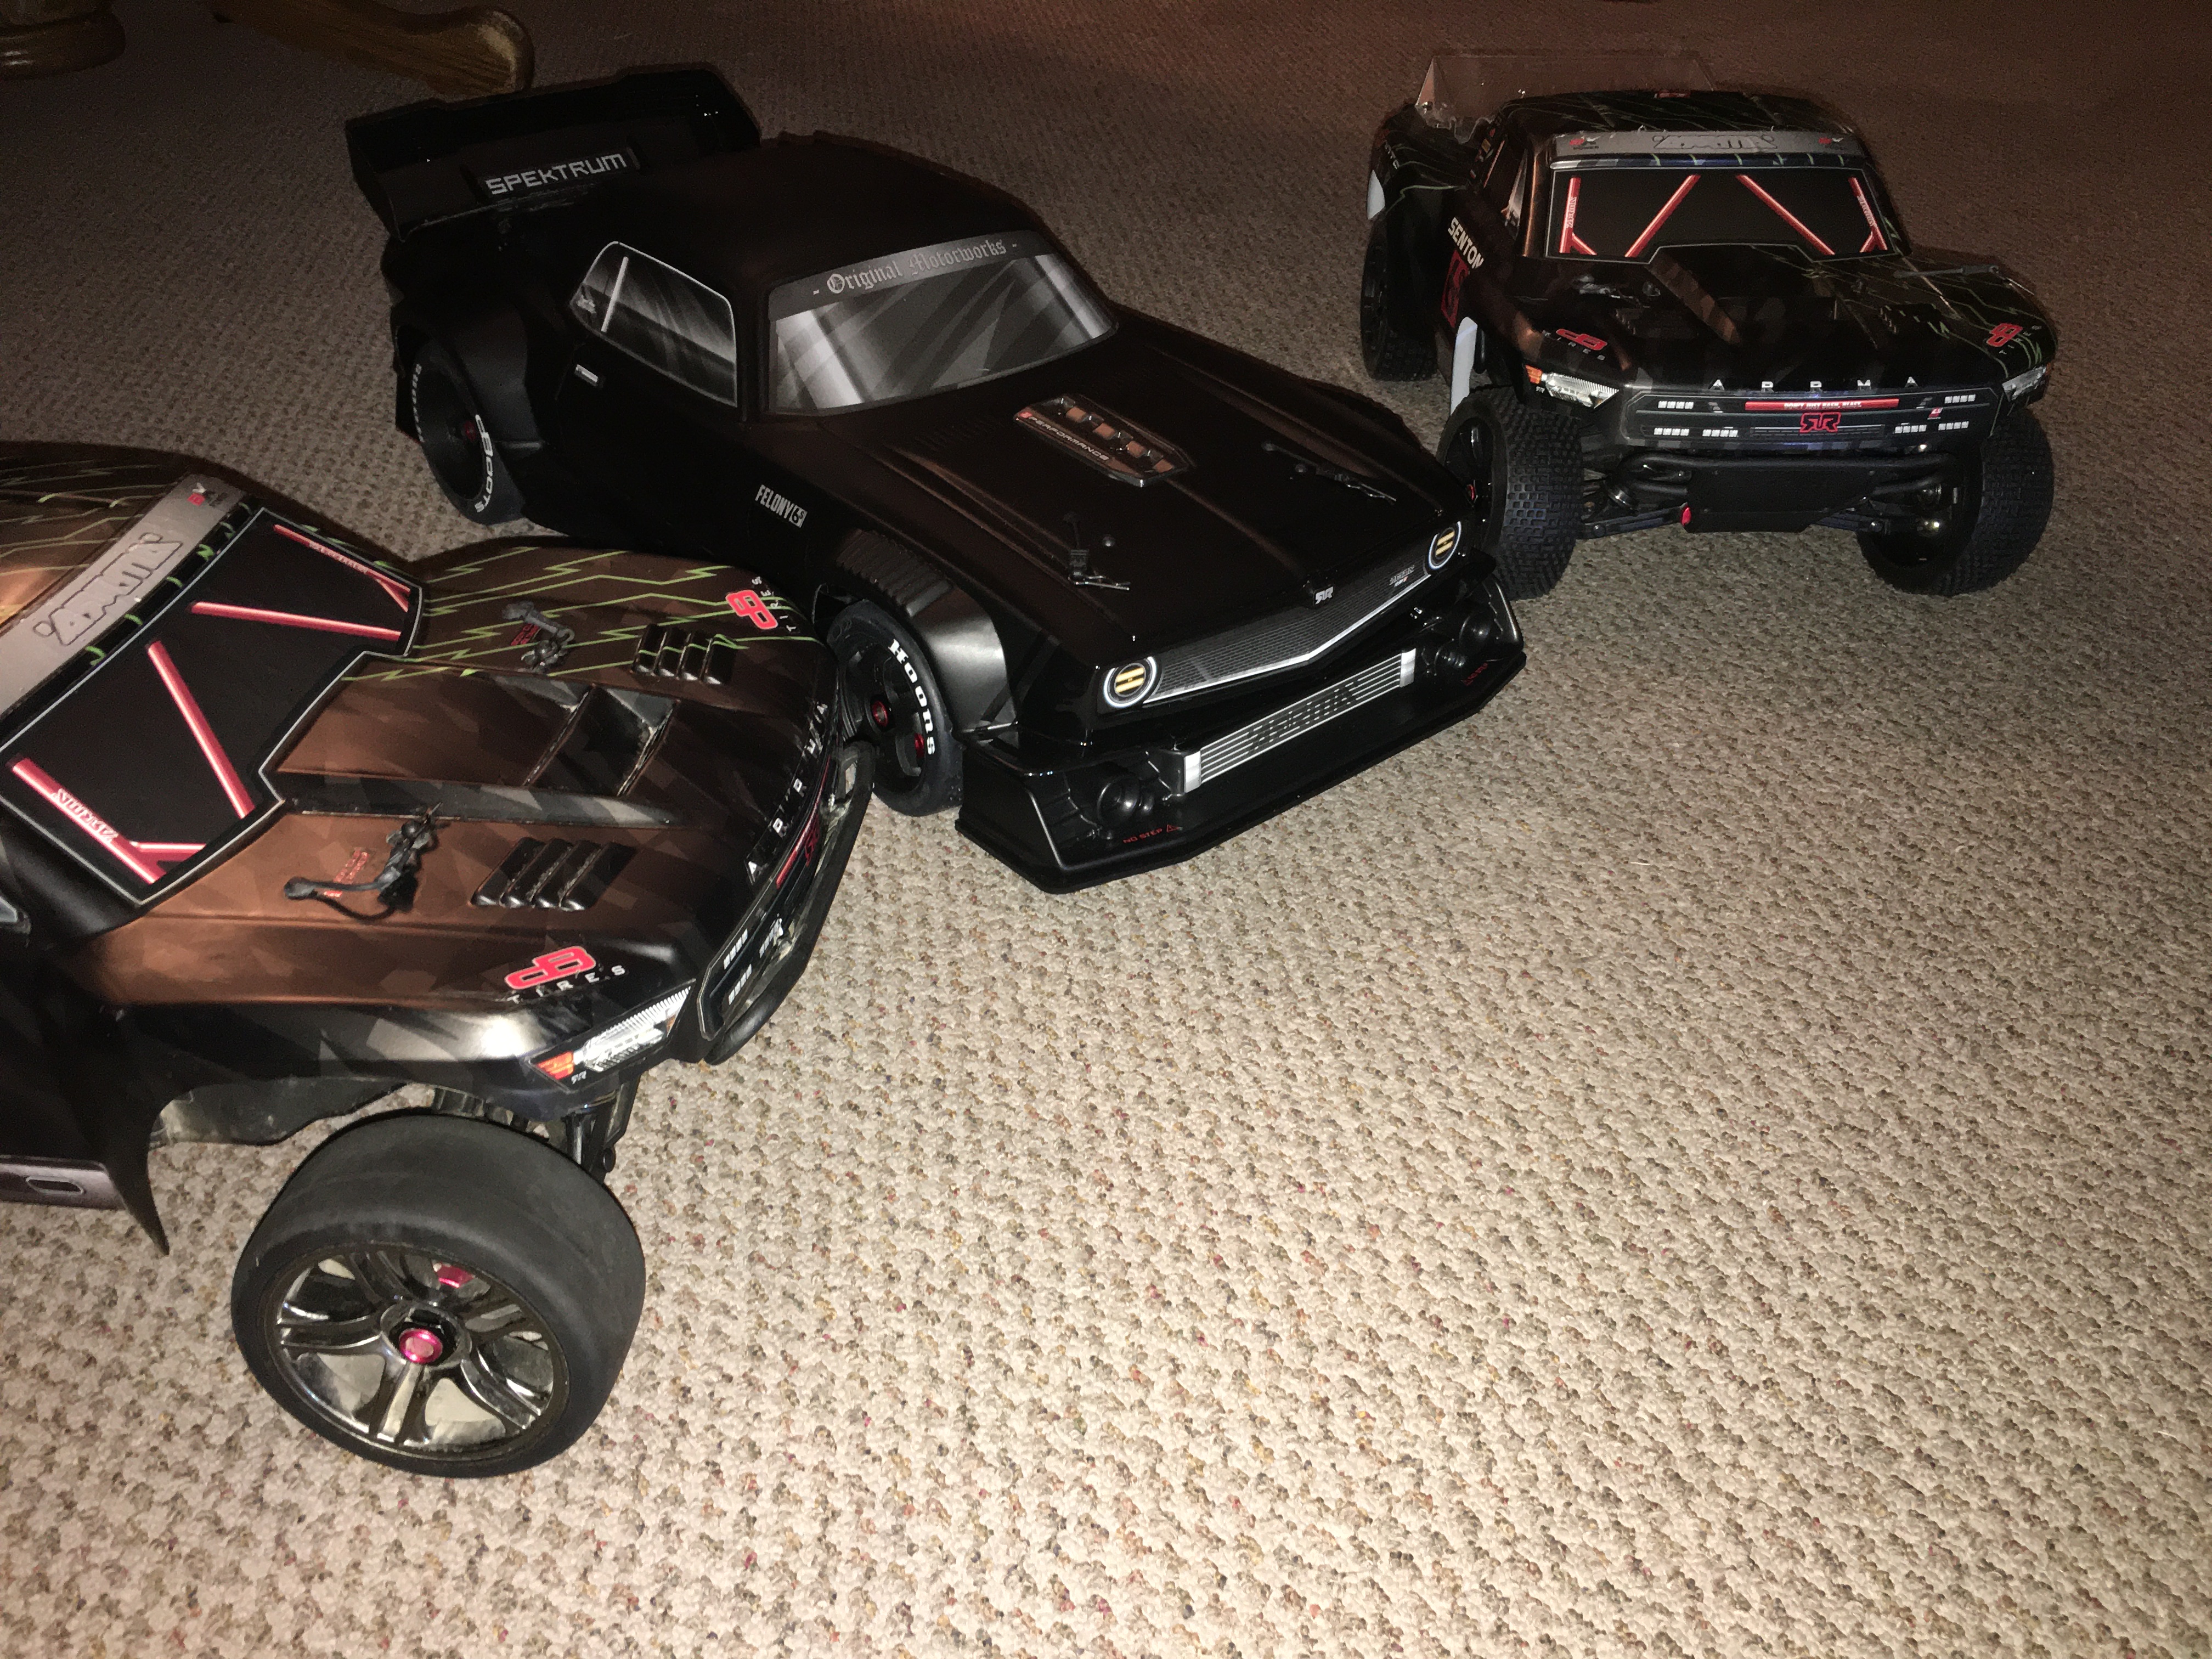 Arrma power! 6s+6s+6s= AWESOME